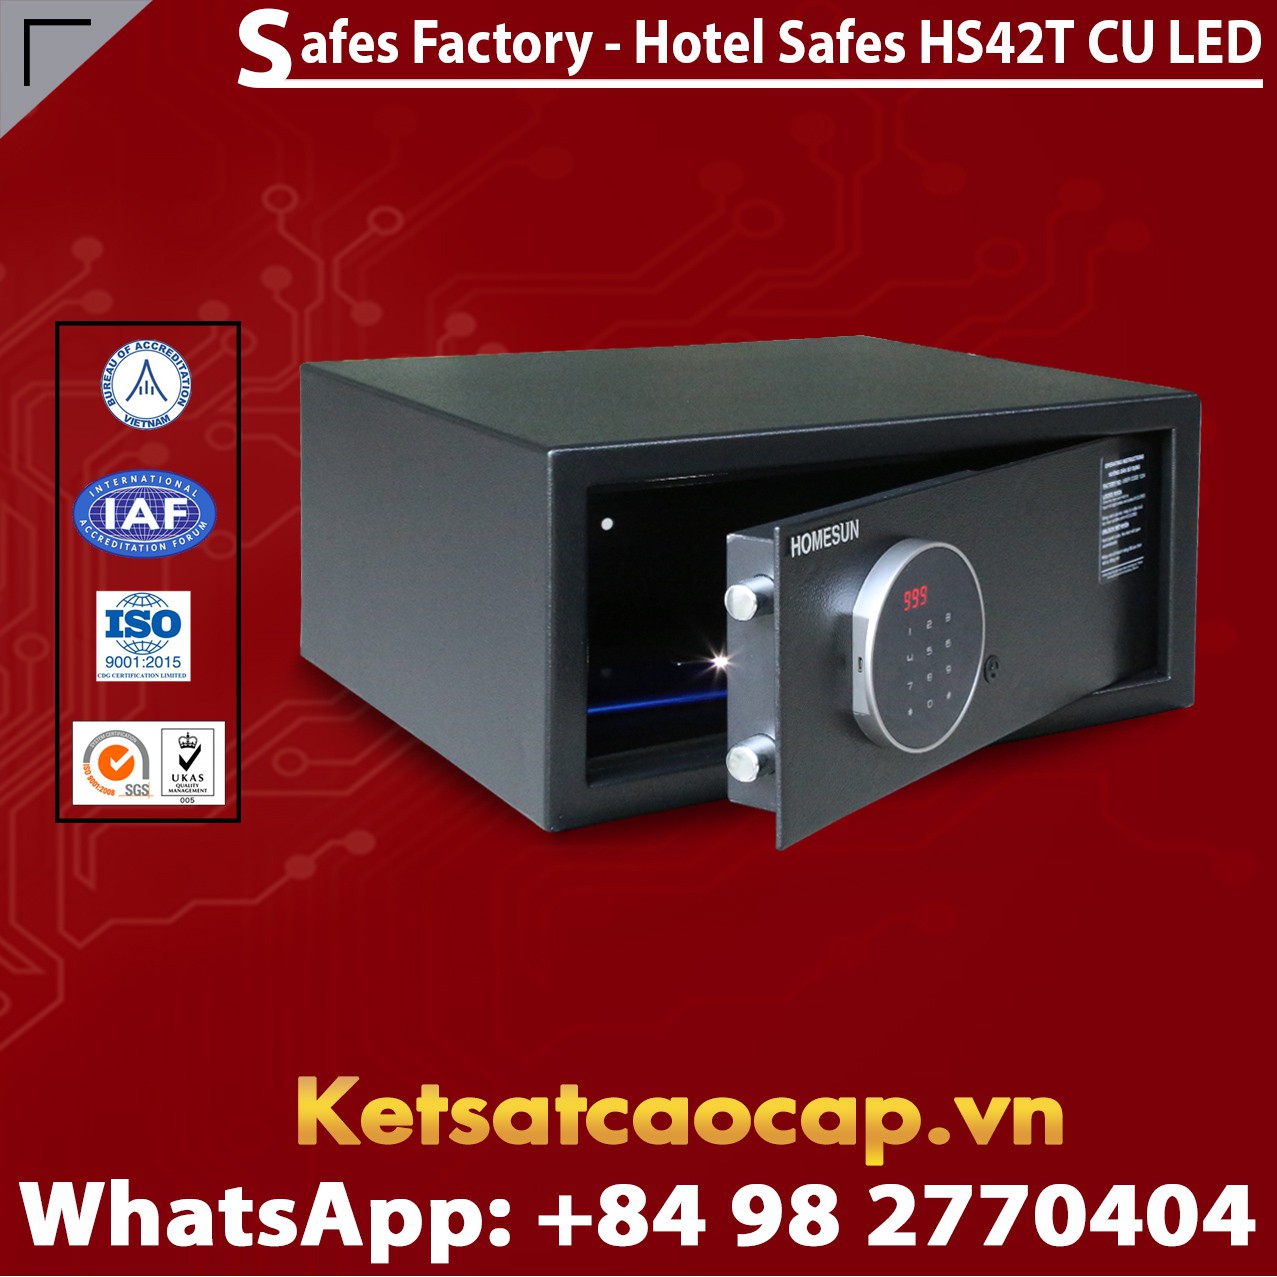 Hotel Safety Deposit Box Suppliers and Exporters‎ HOMESUN